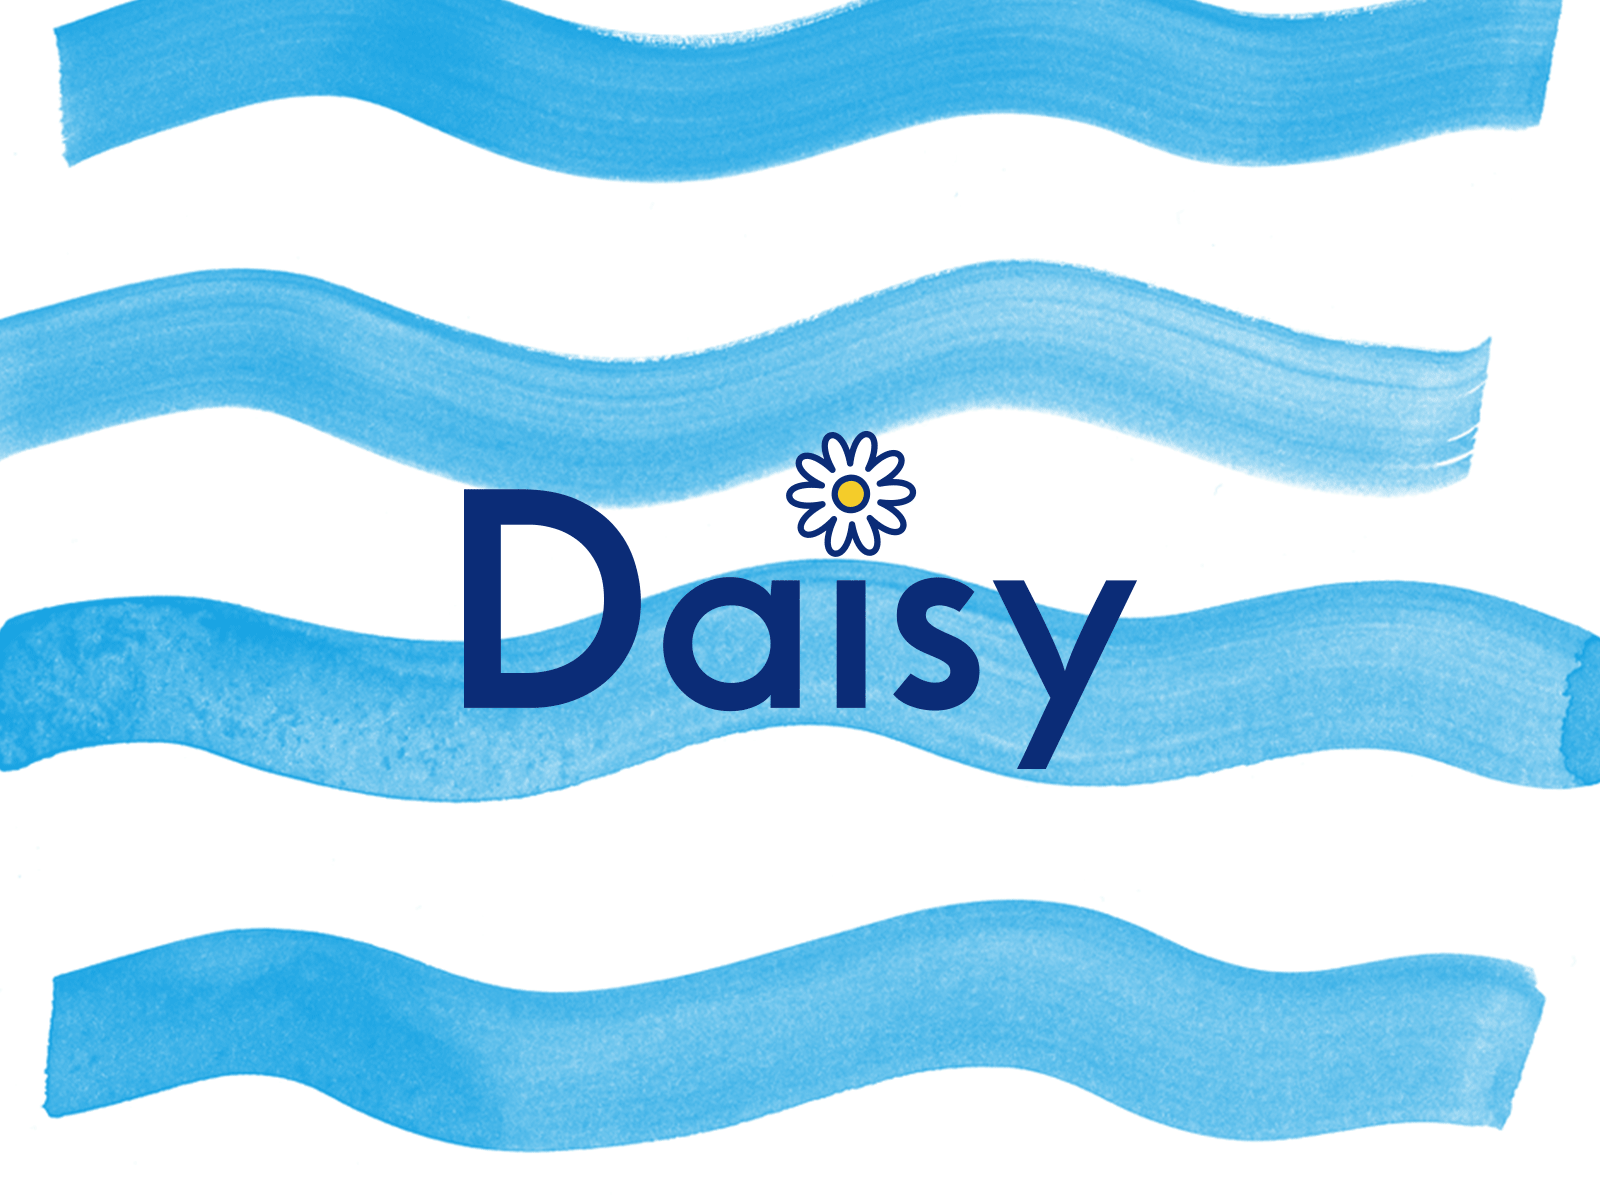 Daisy branding and packaging design